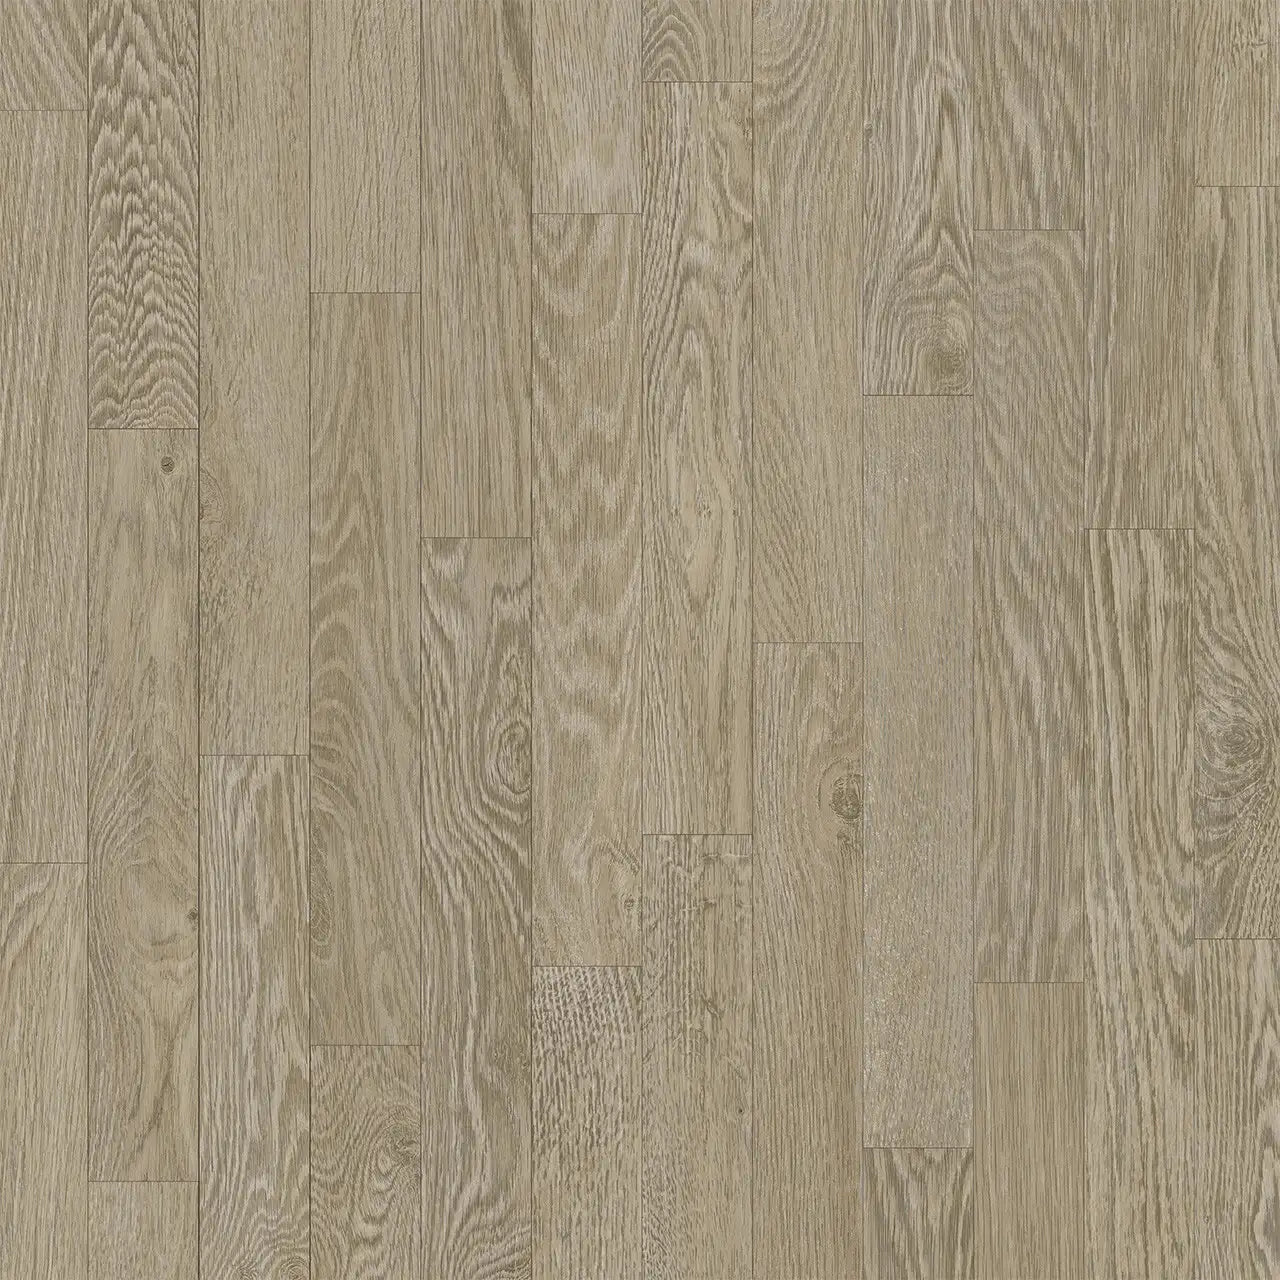 Engineered Floors - Atmosphere Collection - 7 in. x 48 in. - Shooting Star